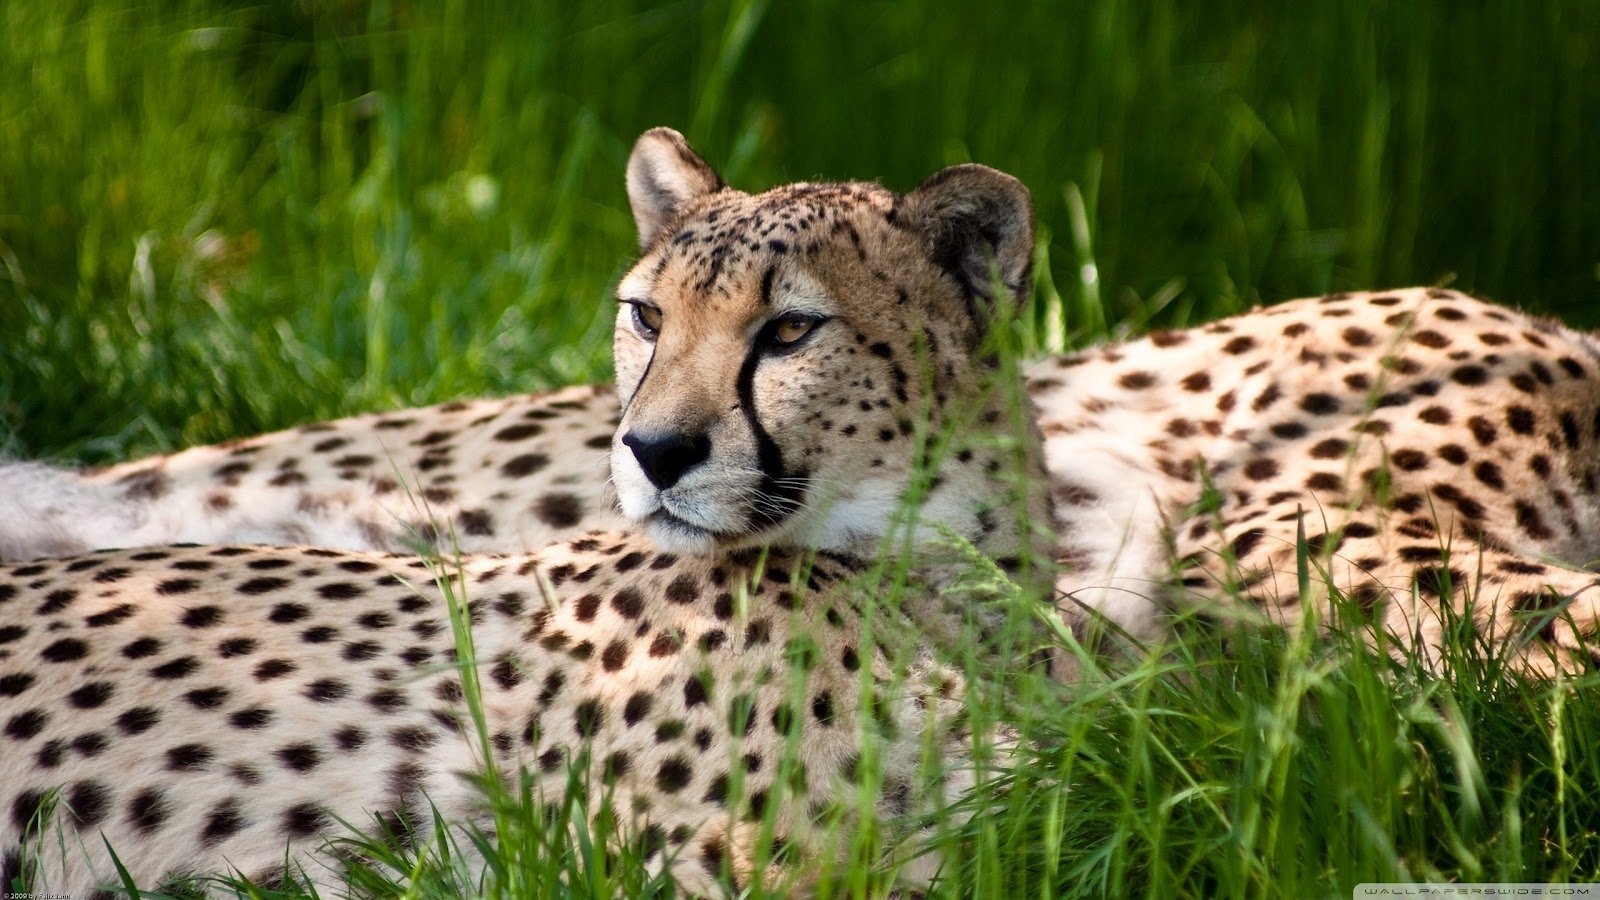 Cheetah wallpaper FULL HD High Definition Wallpapers Pictures For